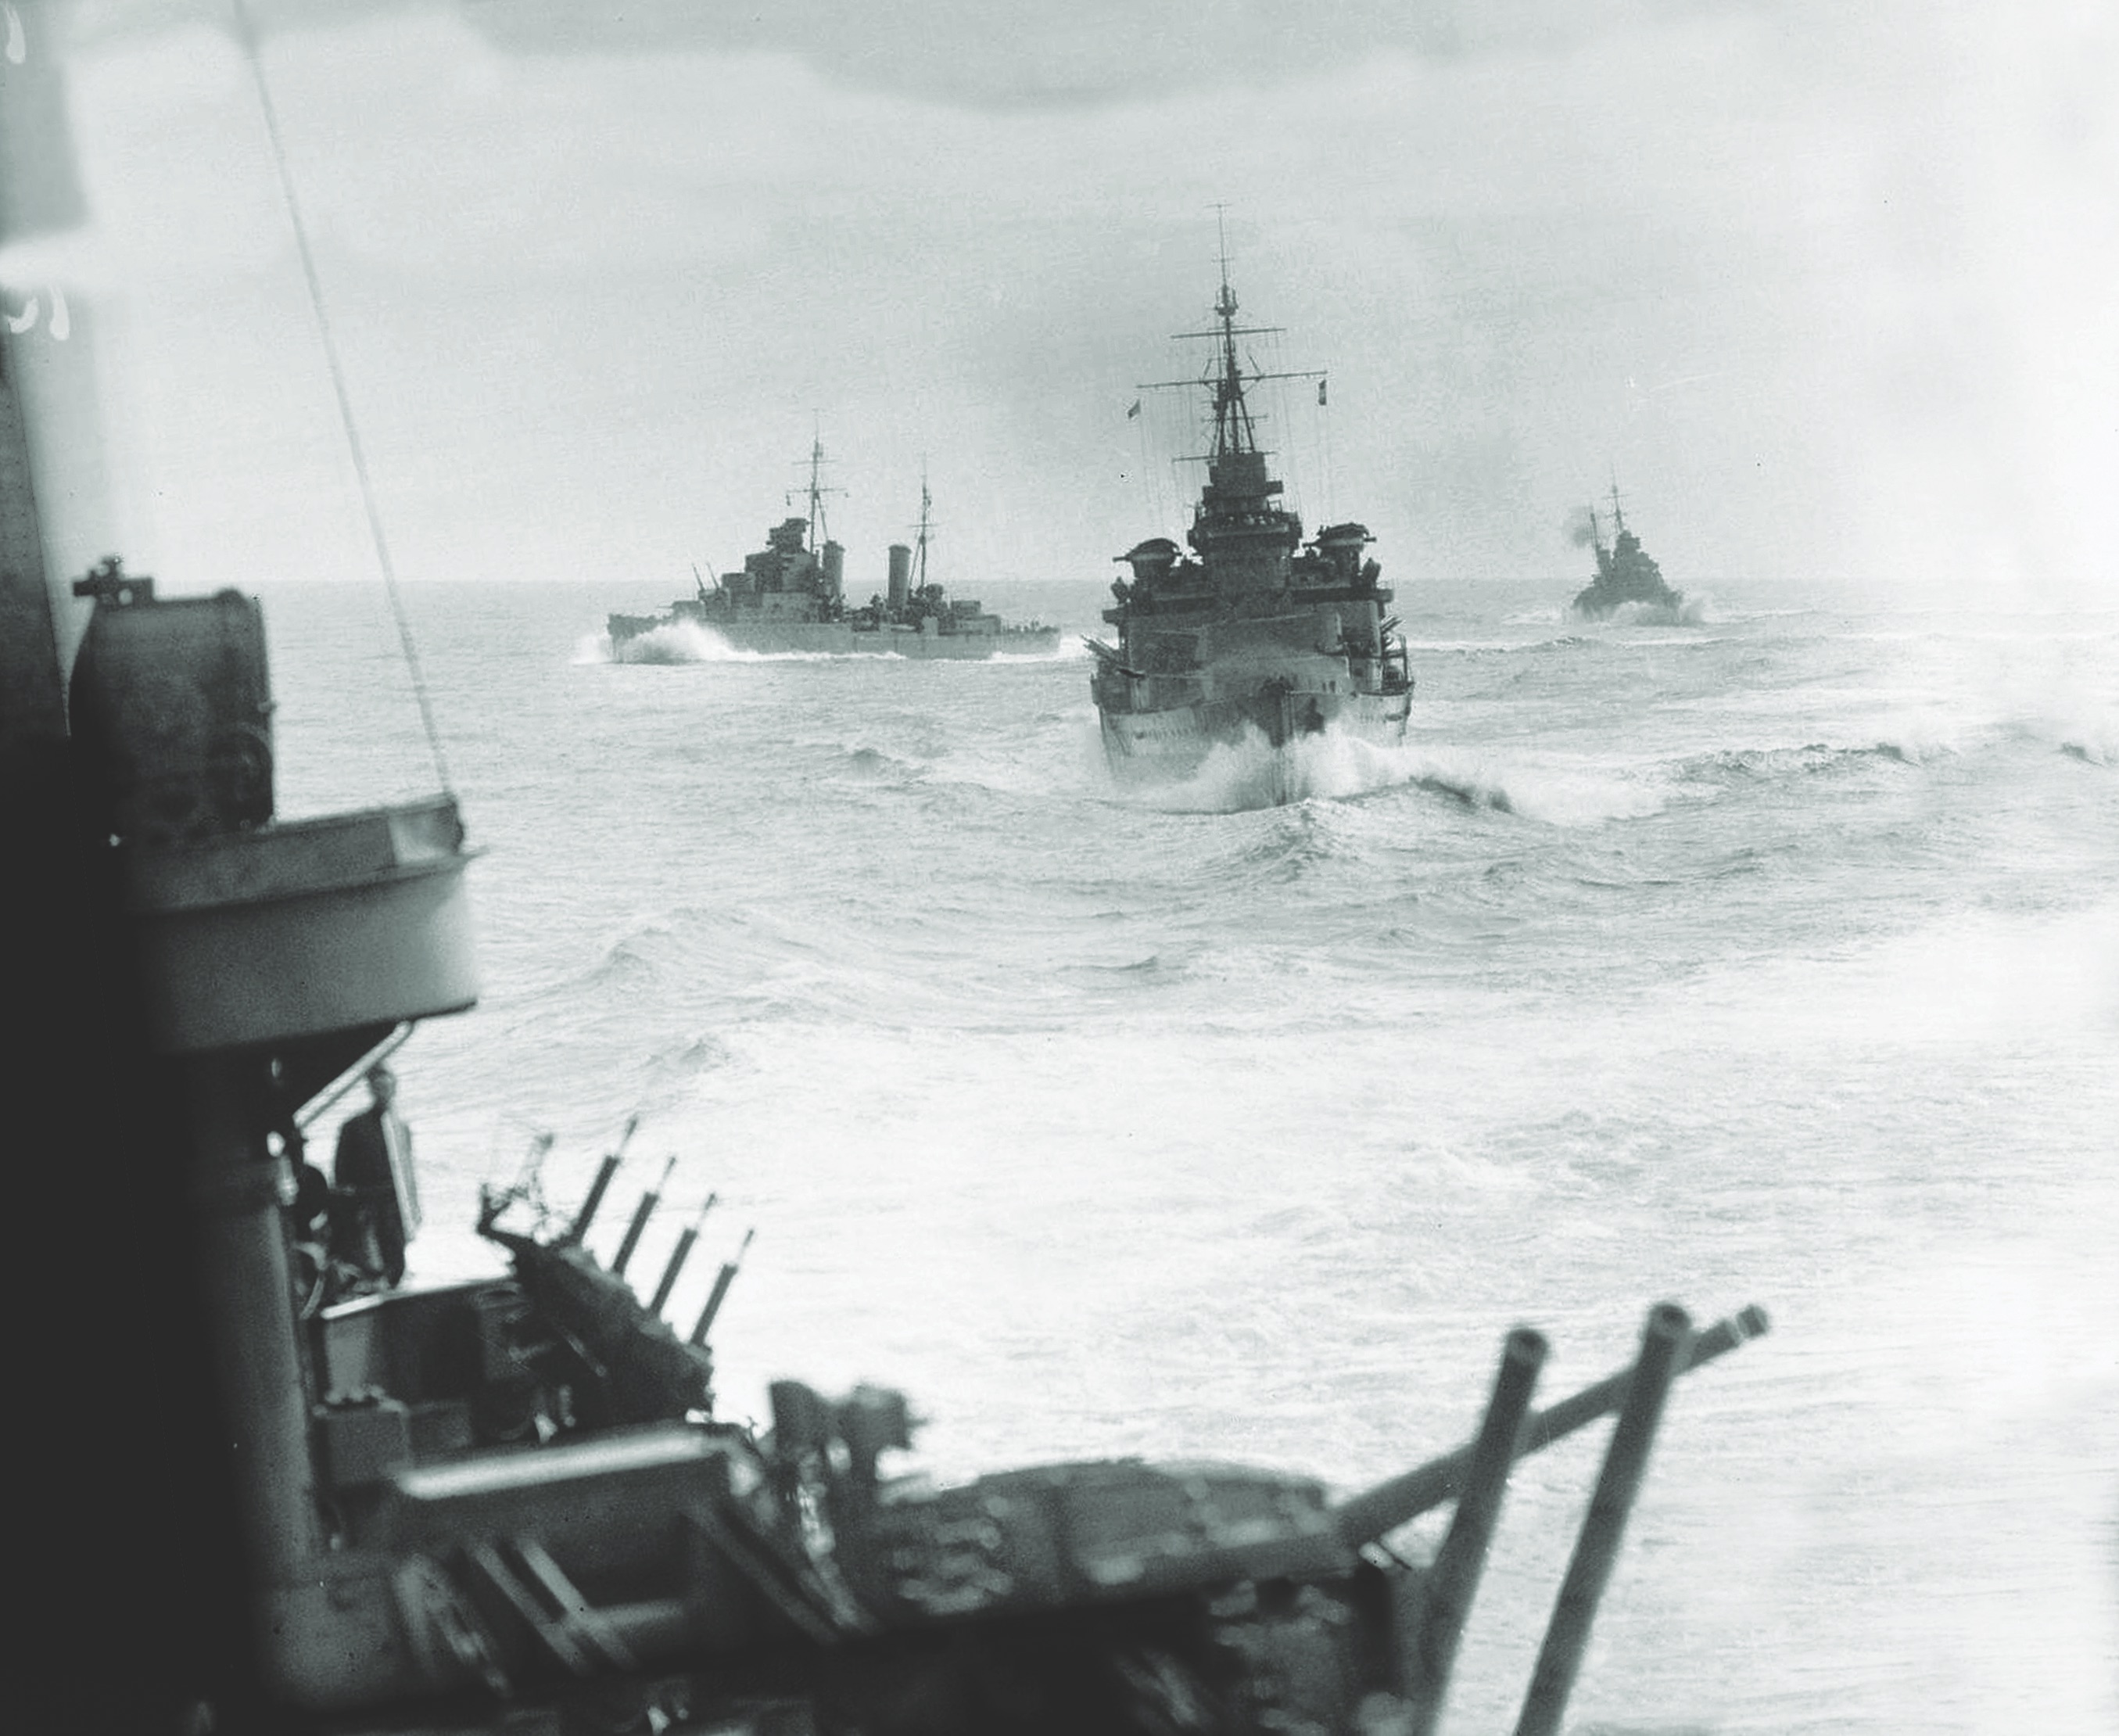 The British light cruisers Hermione, Edinburgh and Euryalus maneuver while escorting a convoy to Malta. On June 16, 1942, the German sub U-205 sank Hermione off the island. (Imperial War Museums)